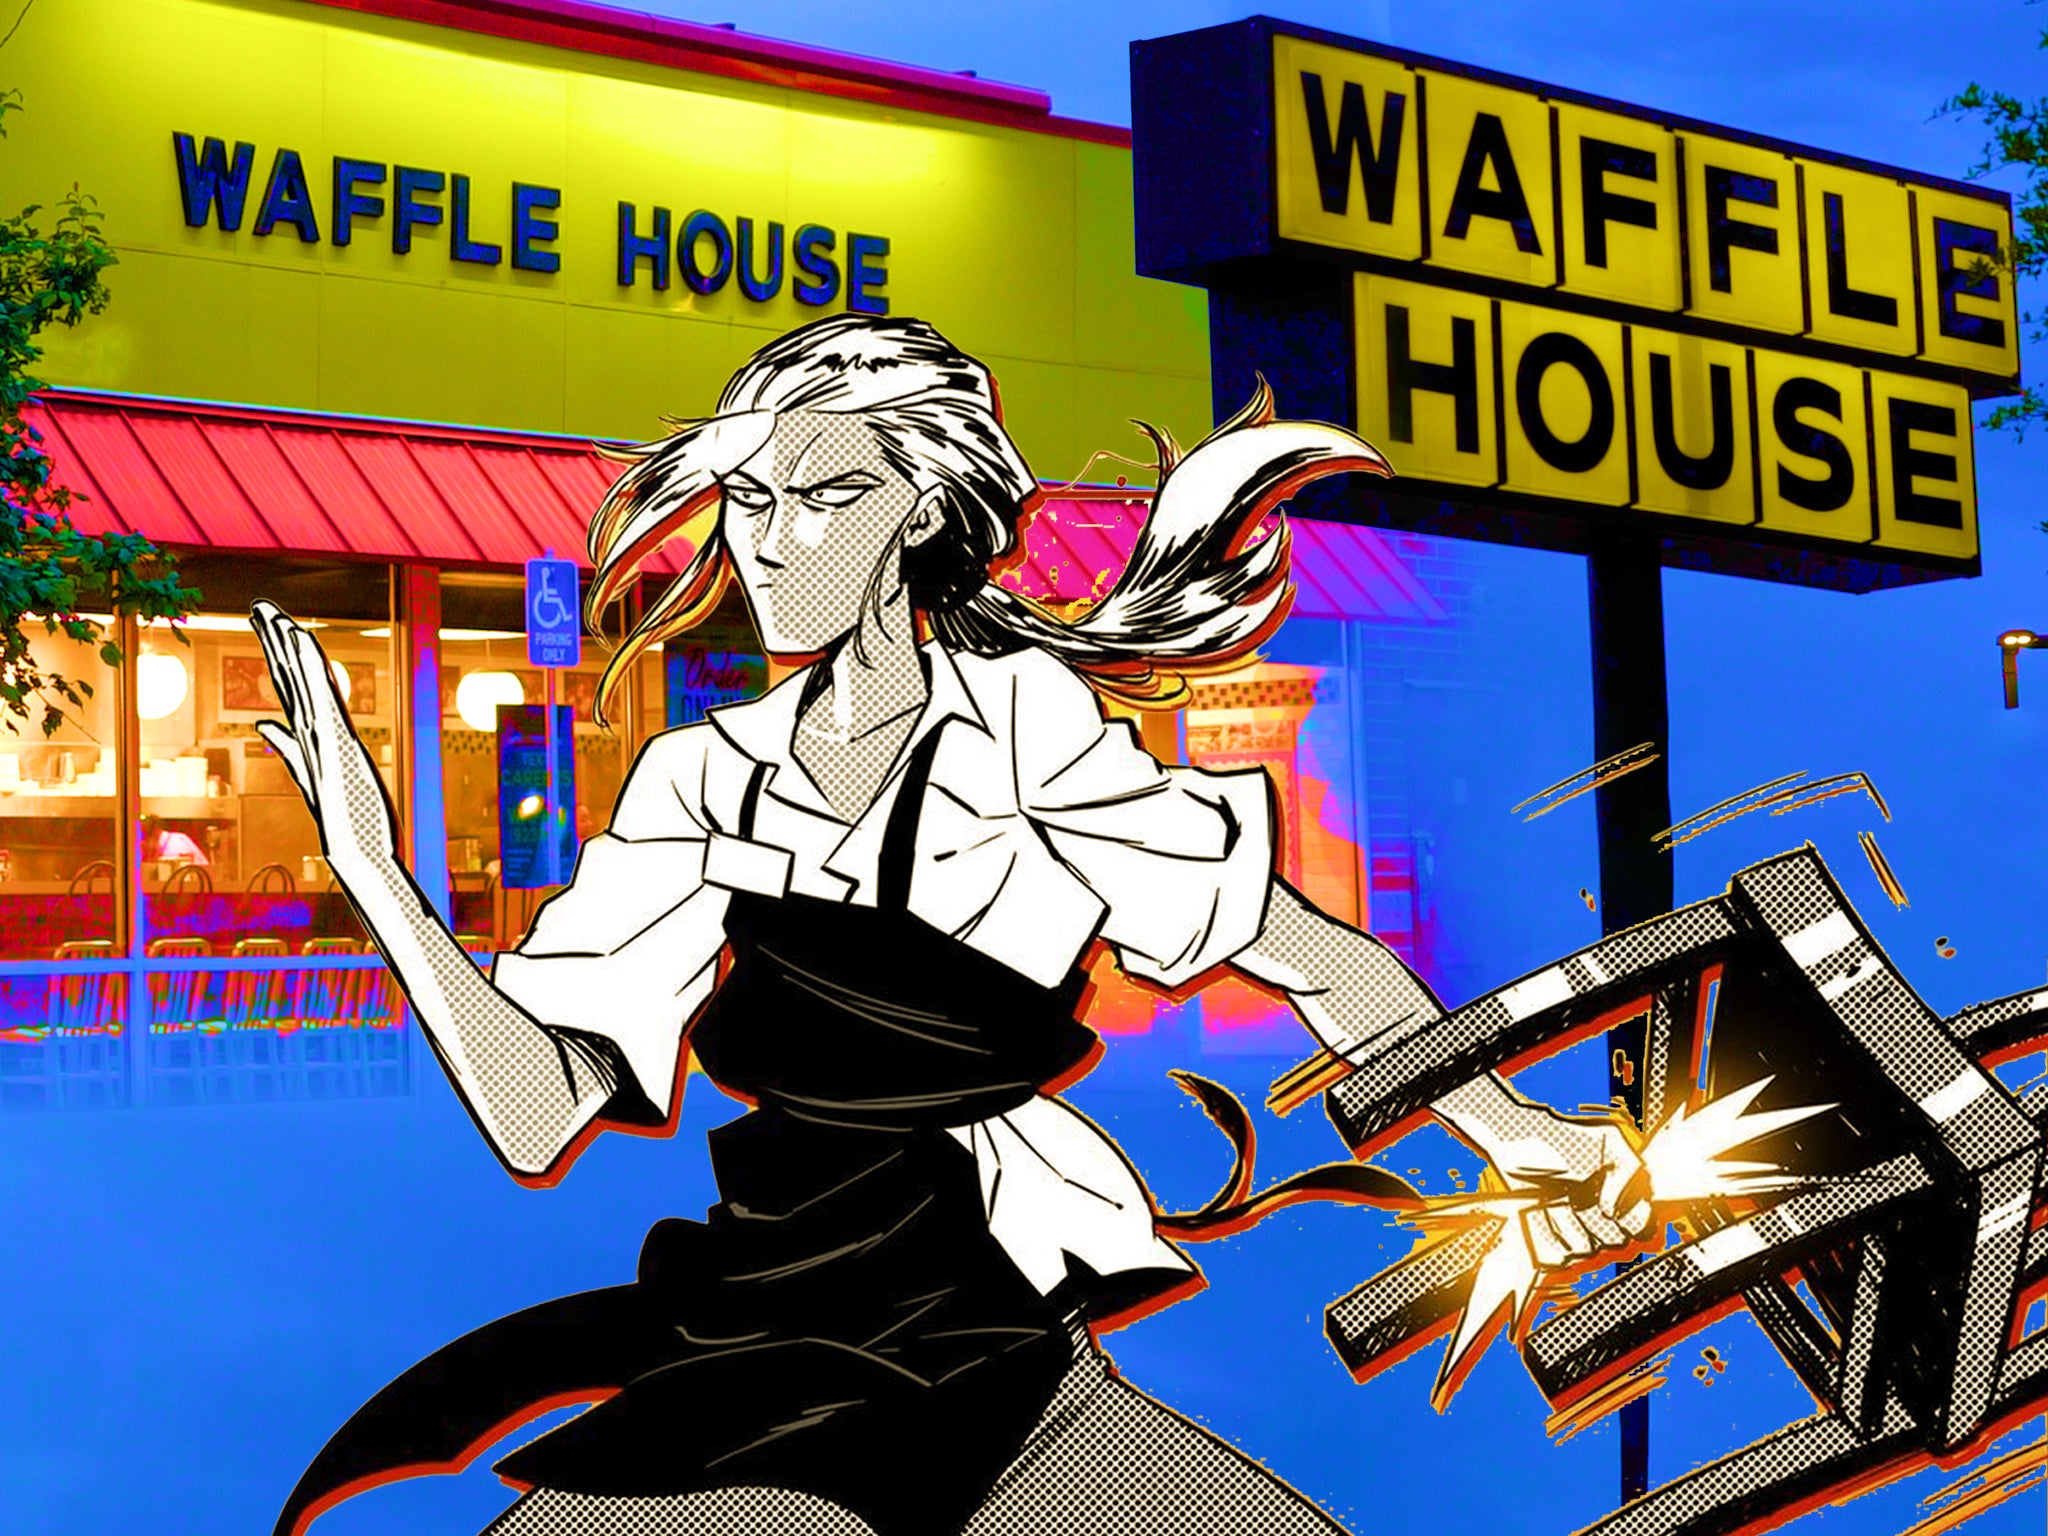 Waffle House has a reputation as a place where people throw down